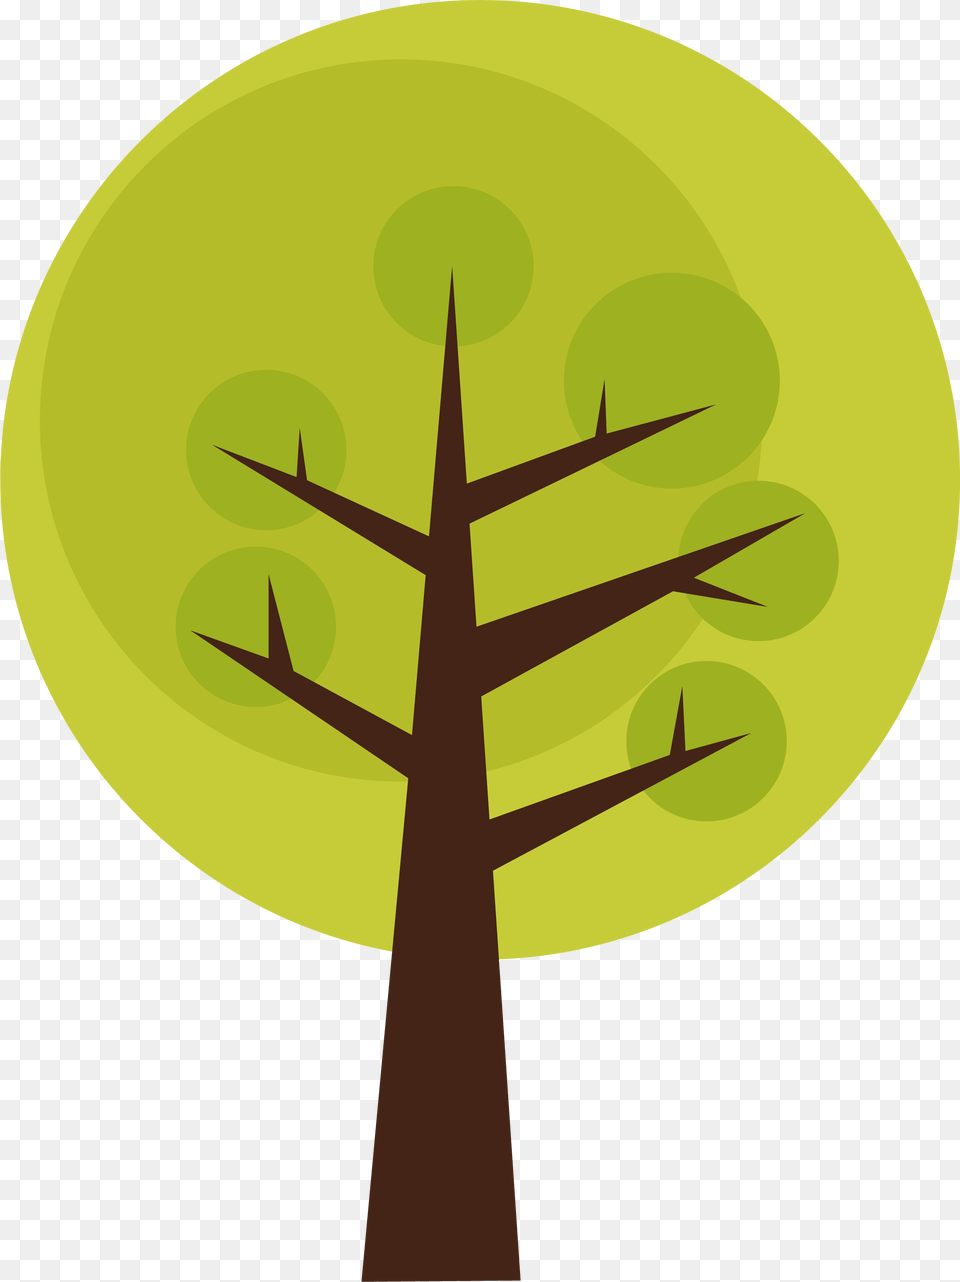 Tree Images Quality Transparent Pictures, Utility Pole Free Png